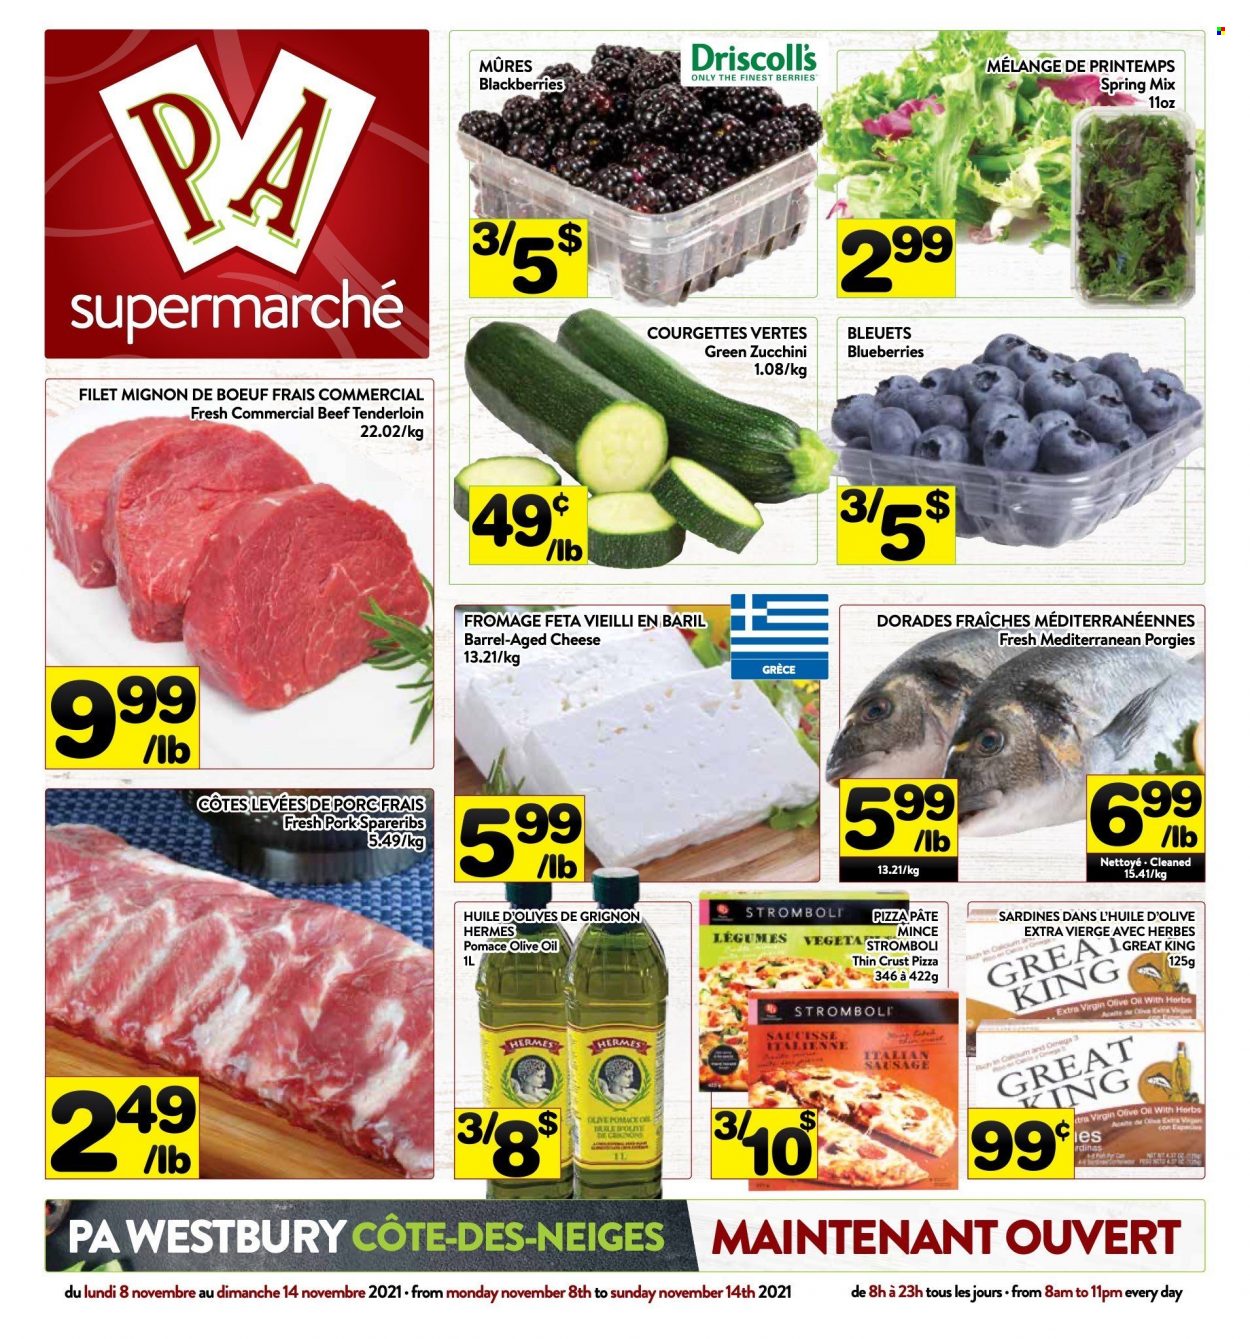 thumbnail - PA Supermarché Flyer - November 08, 2021 - November 14, 2021 - Sales products - zucchini, blackberries, blueberries, sardines, pizza, sausage, italian sausage, feta, extra virgin olive oil, olive oil, oil, beef meat, beef tenderloin, pork spare ribs, olives. Page 1.